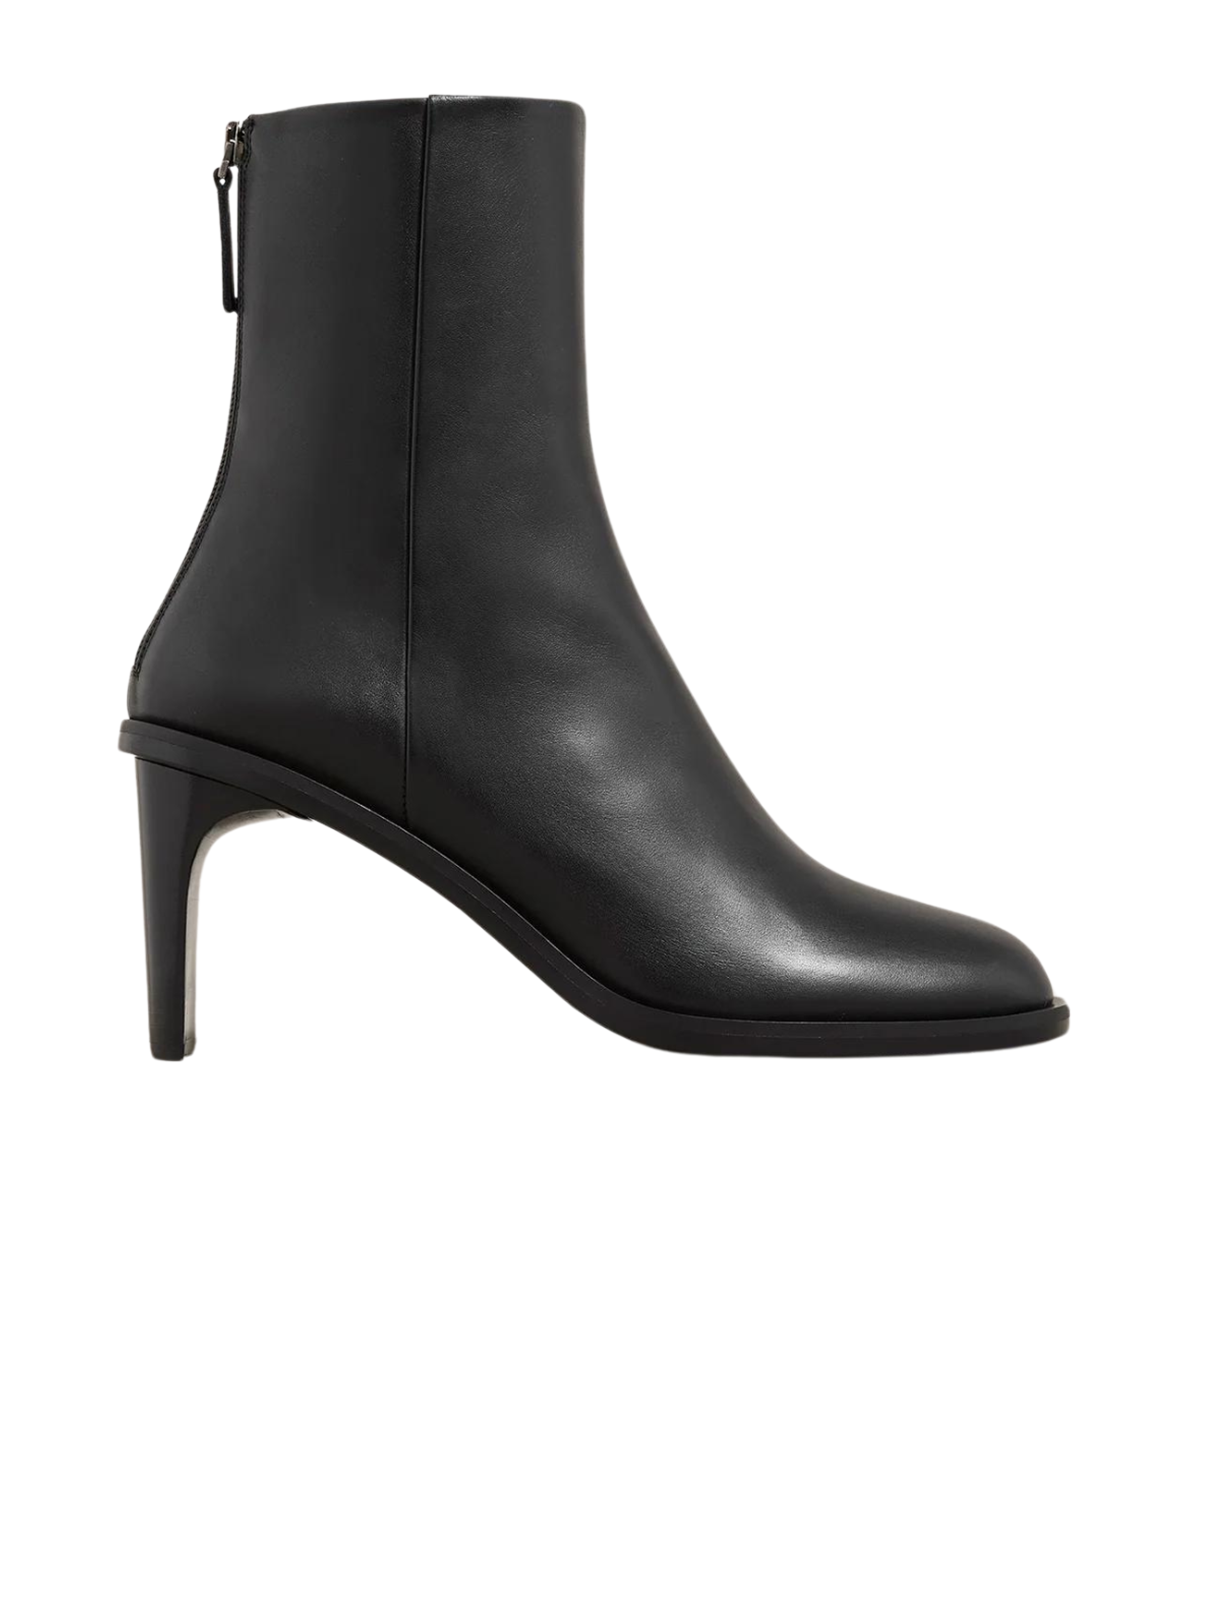 The Florence Boot